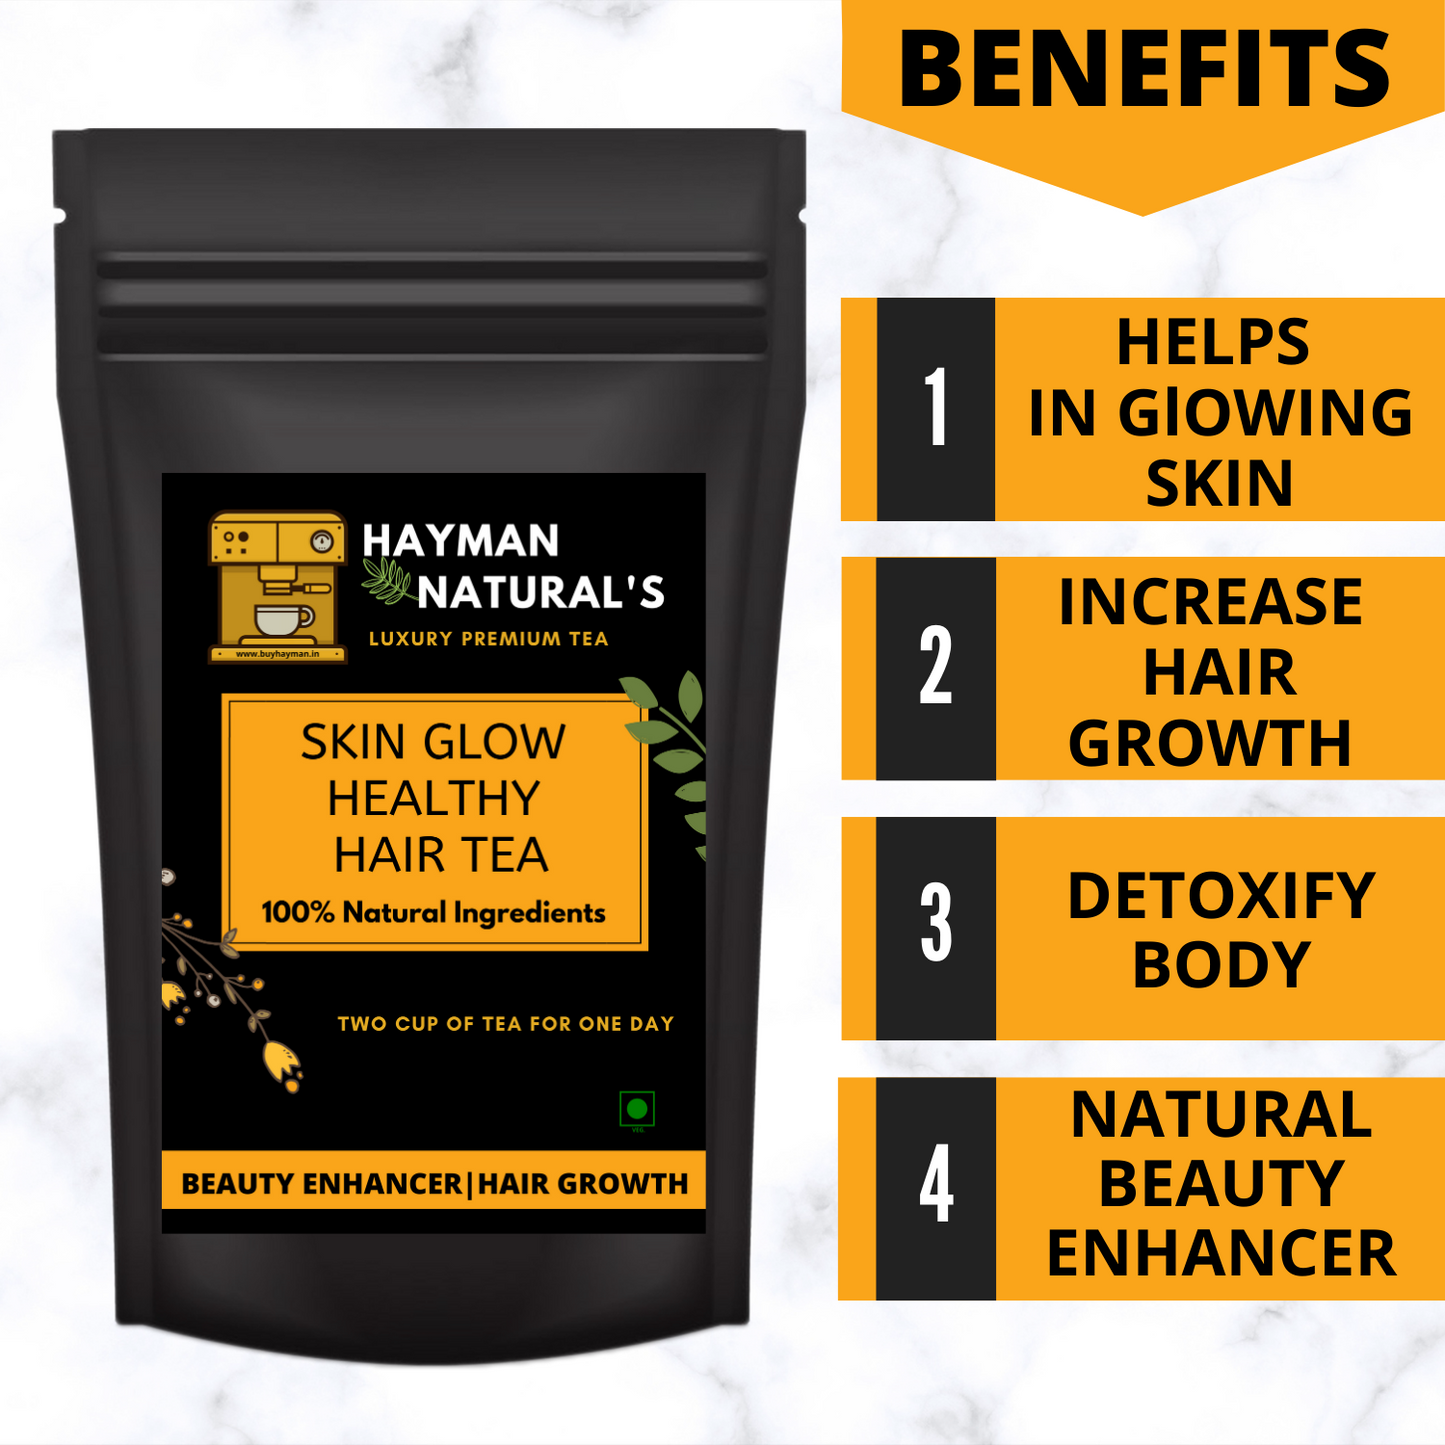 Hayman Natural's Skin Glow Healthy Hair Tea with Natural Beauty Enhancer and good for hair